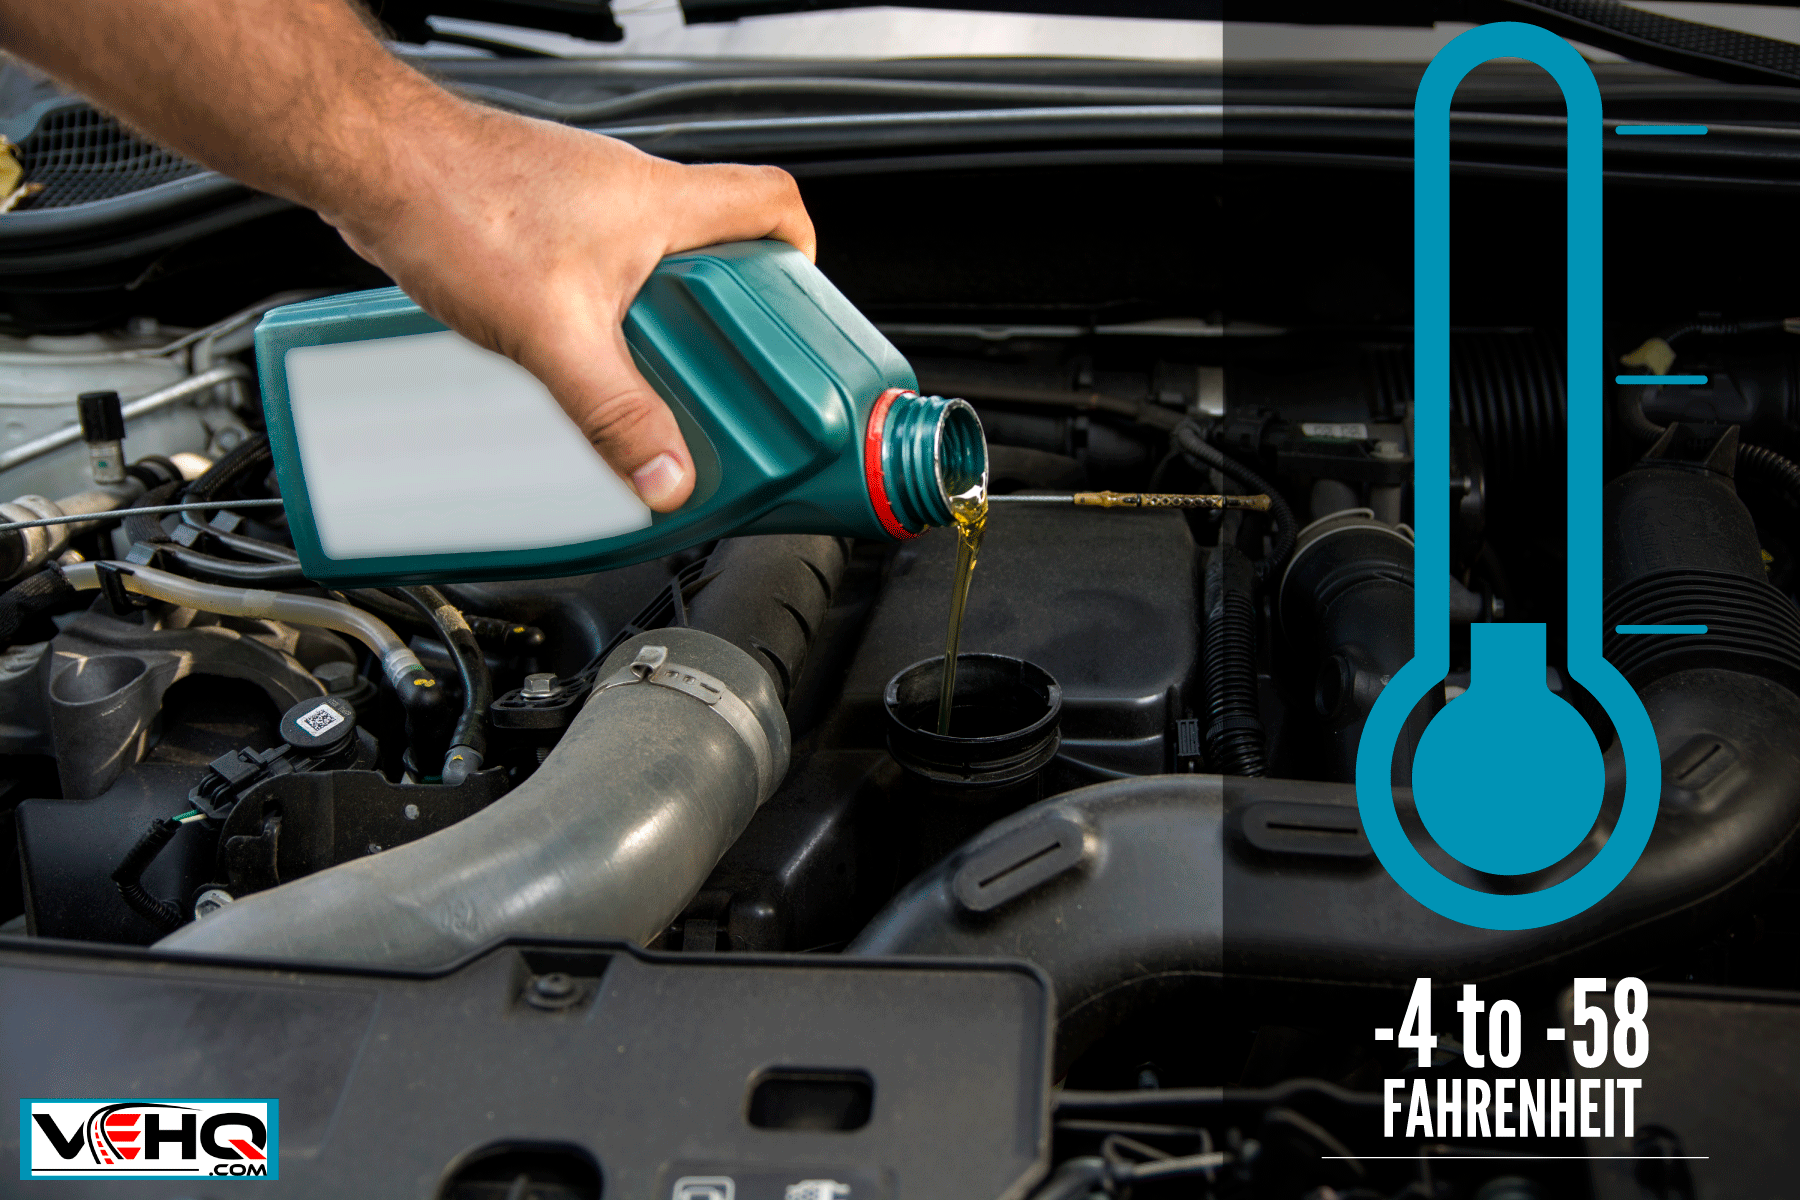 Pouring 20W-50 oil to the car engine, Can Engine Oil Freeze?